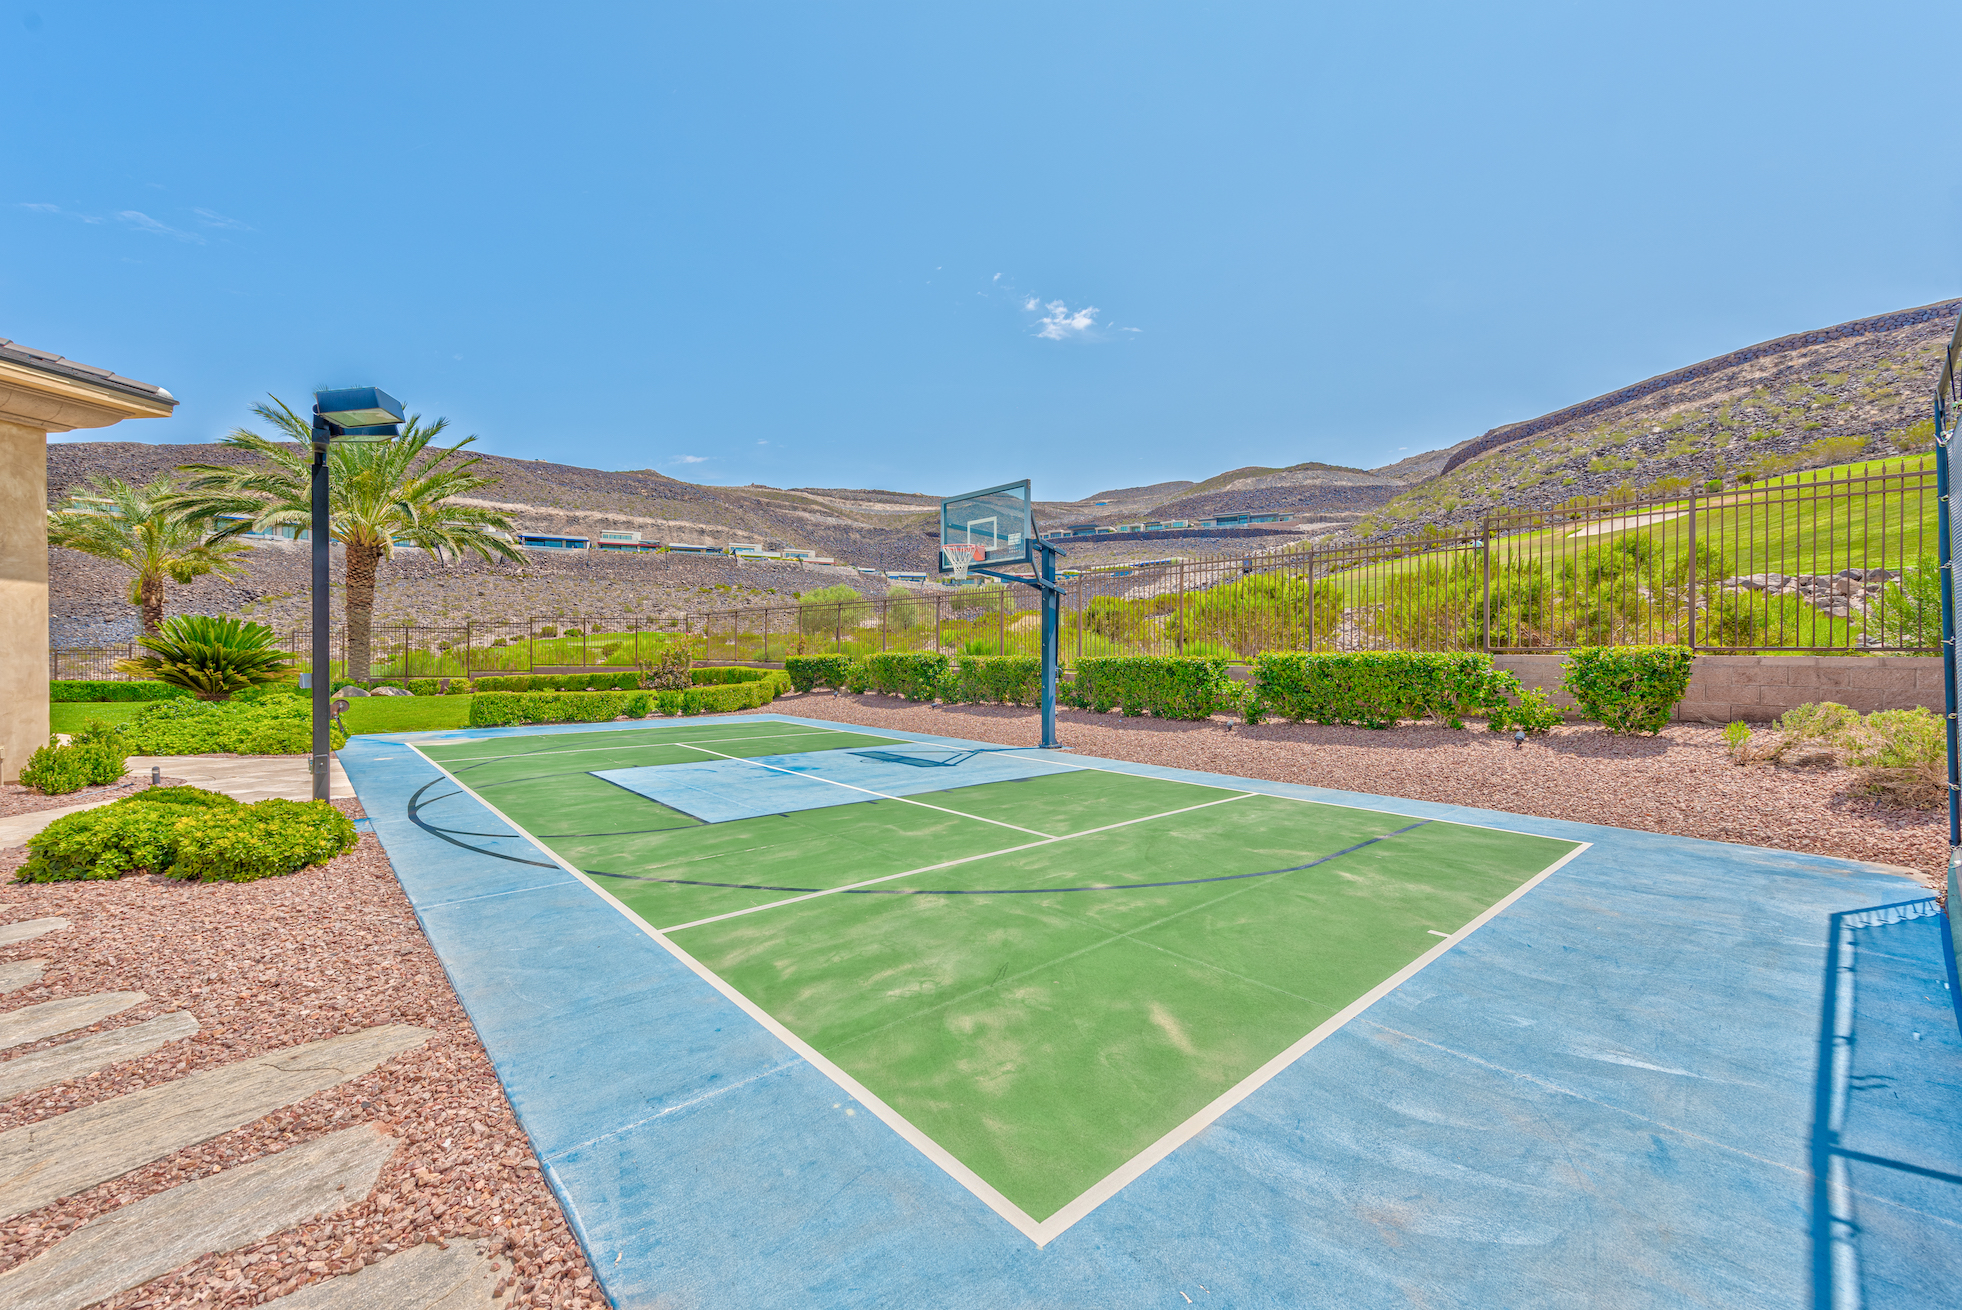 Residential basketball court with desert views.